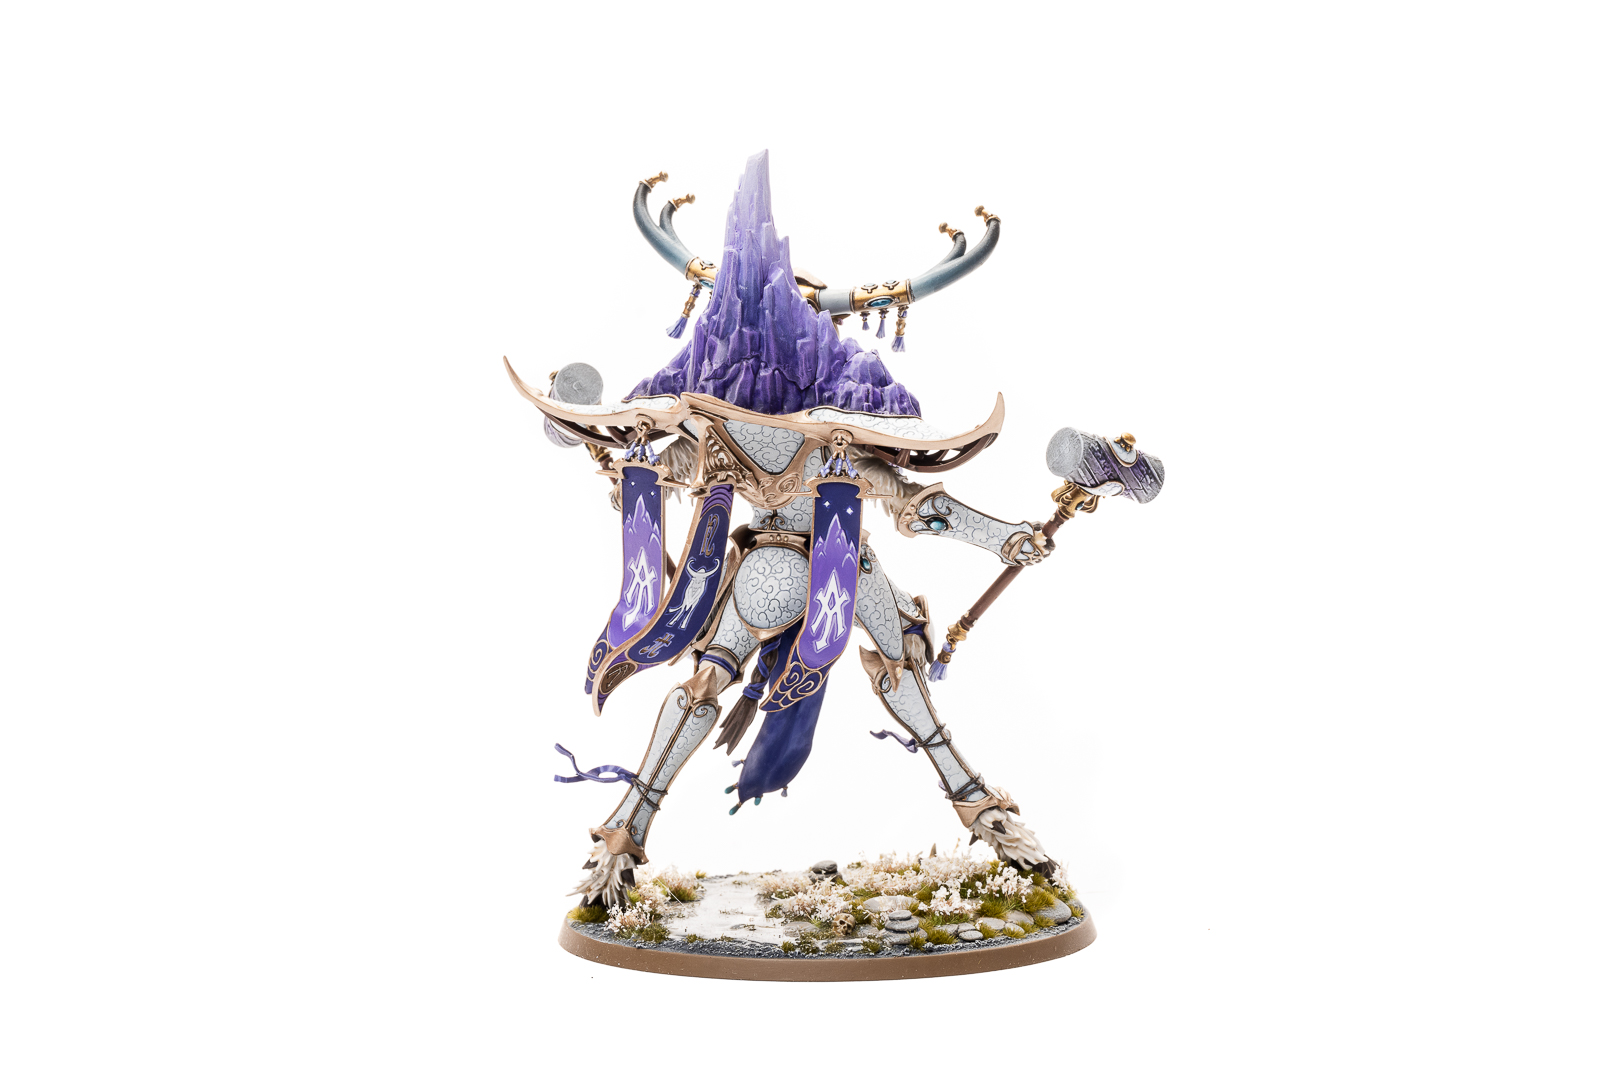 Avalenor the Stone Heart King - Lumineth Realm Lords - Warhammer Age of Sigmar